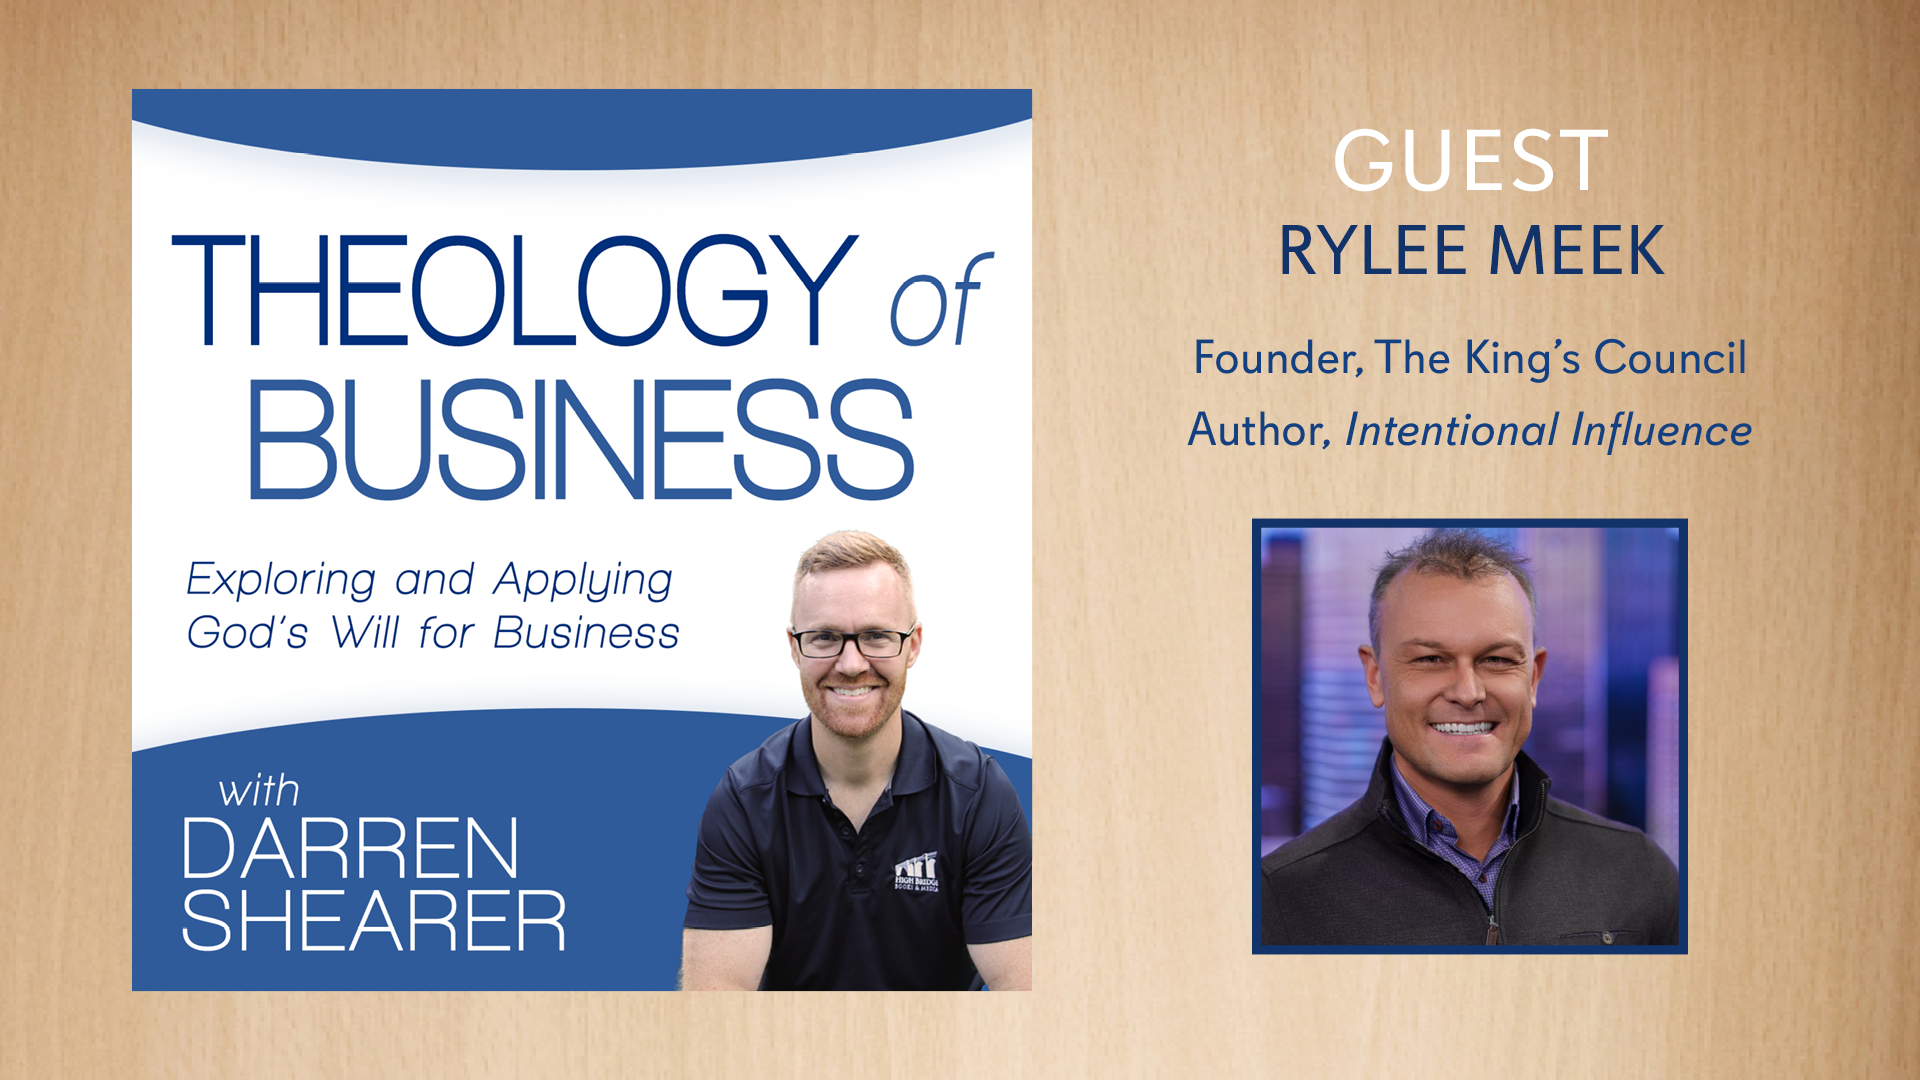 Rylee Meek, Founder of The King's Council and author of Intentional Influence, joins Darren Shearer on the podcast.